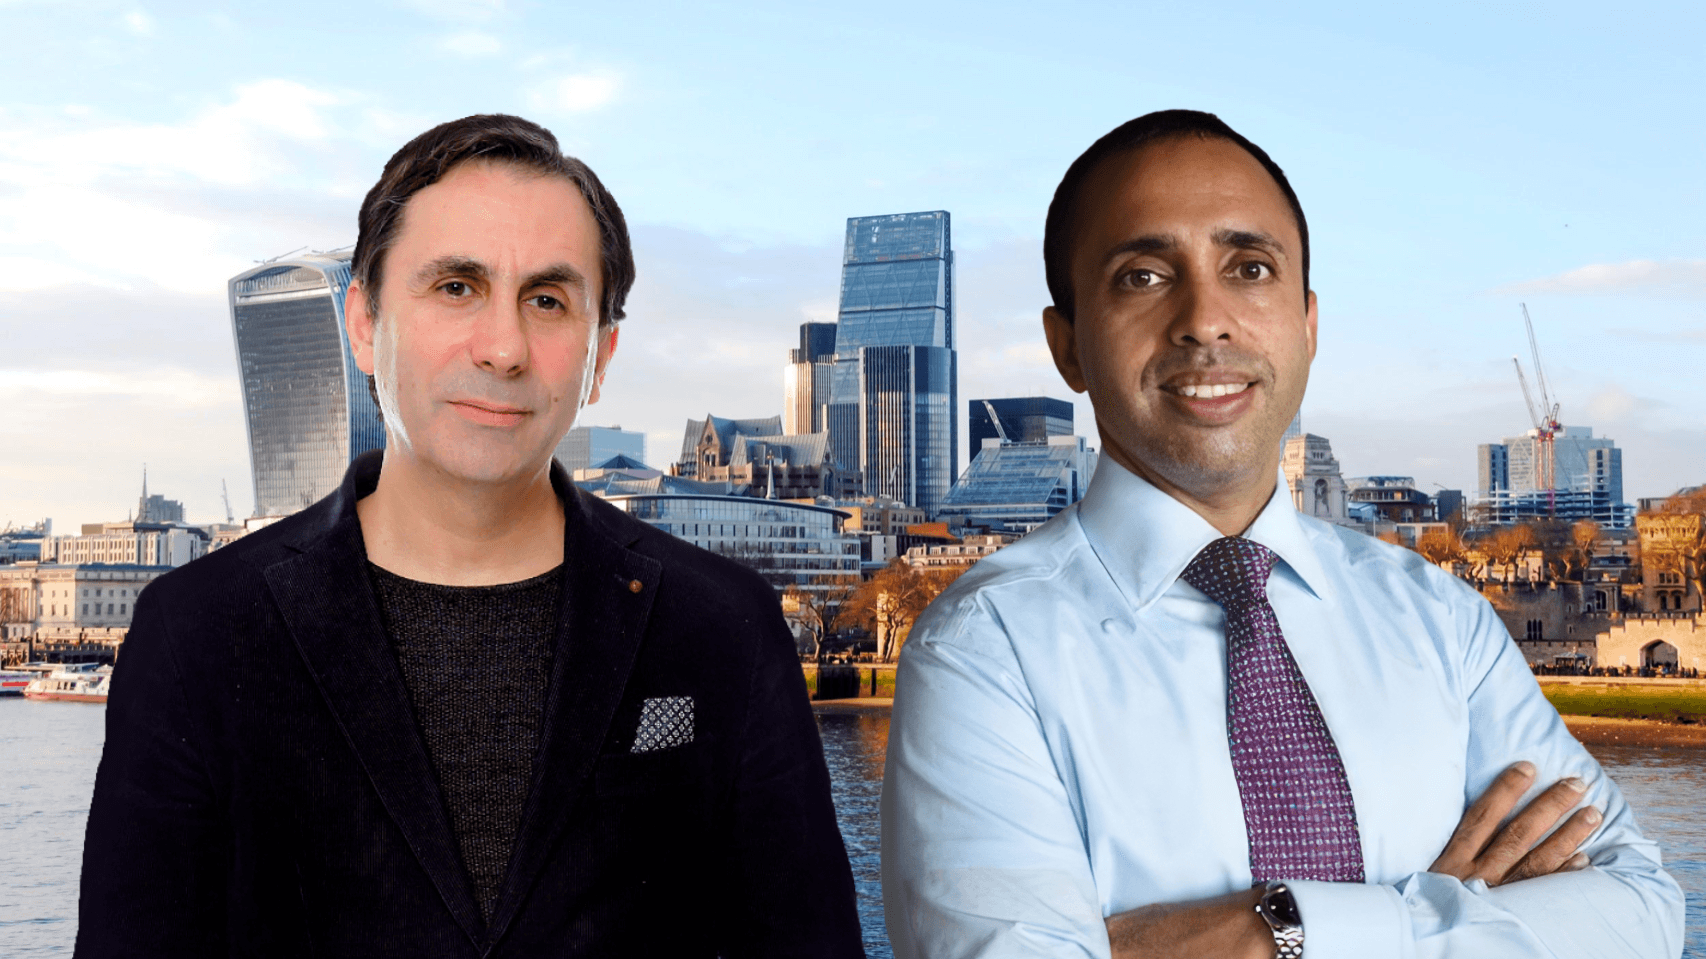 The Modern Face Of $8 Trillion Healthcare Industry: Dinis Guarda Interviews Pradeep Goel, CEO Of Solve.care